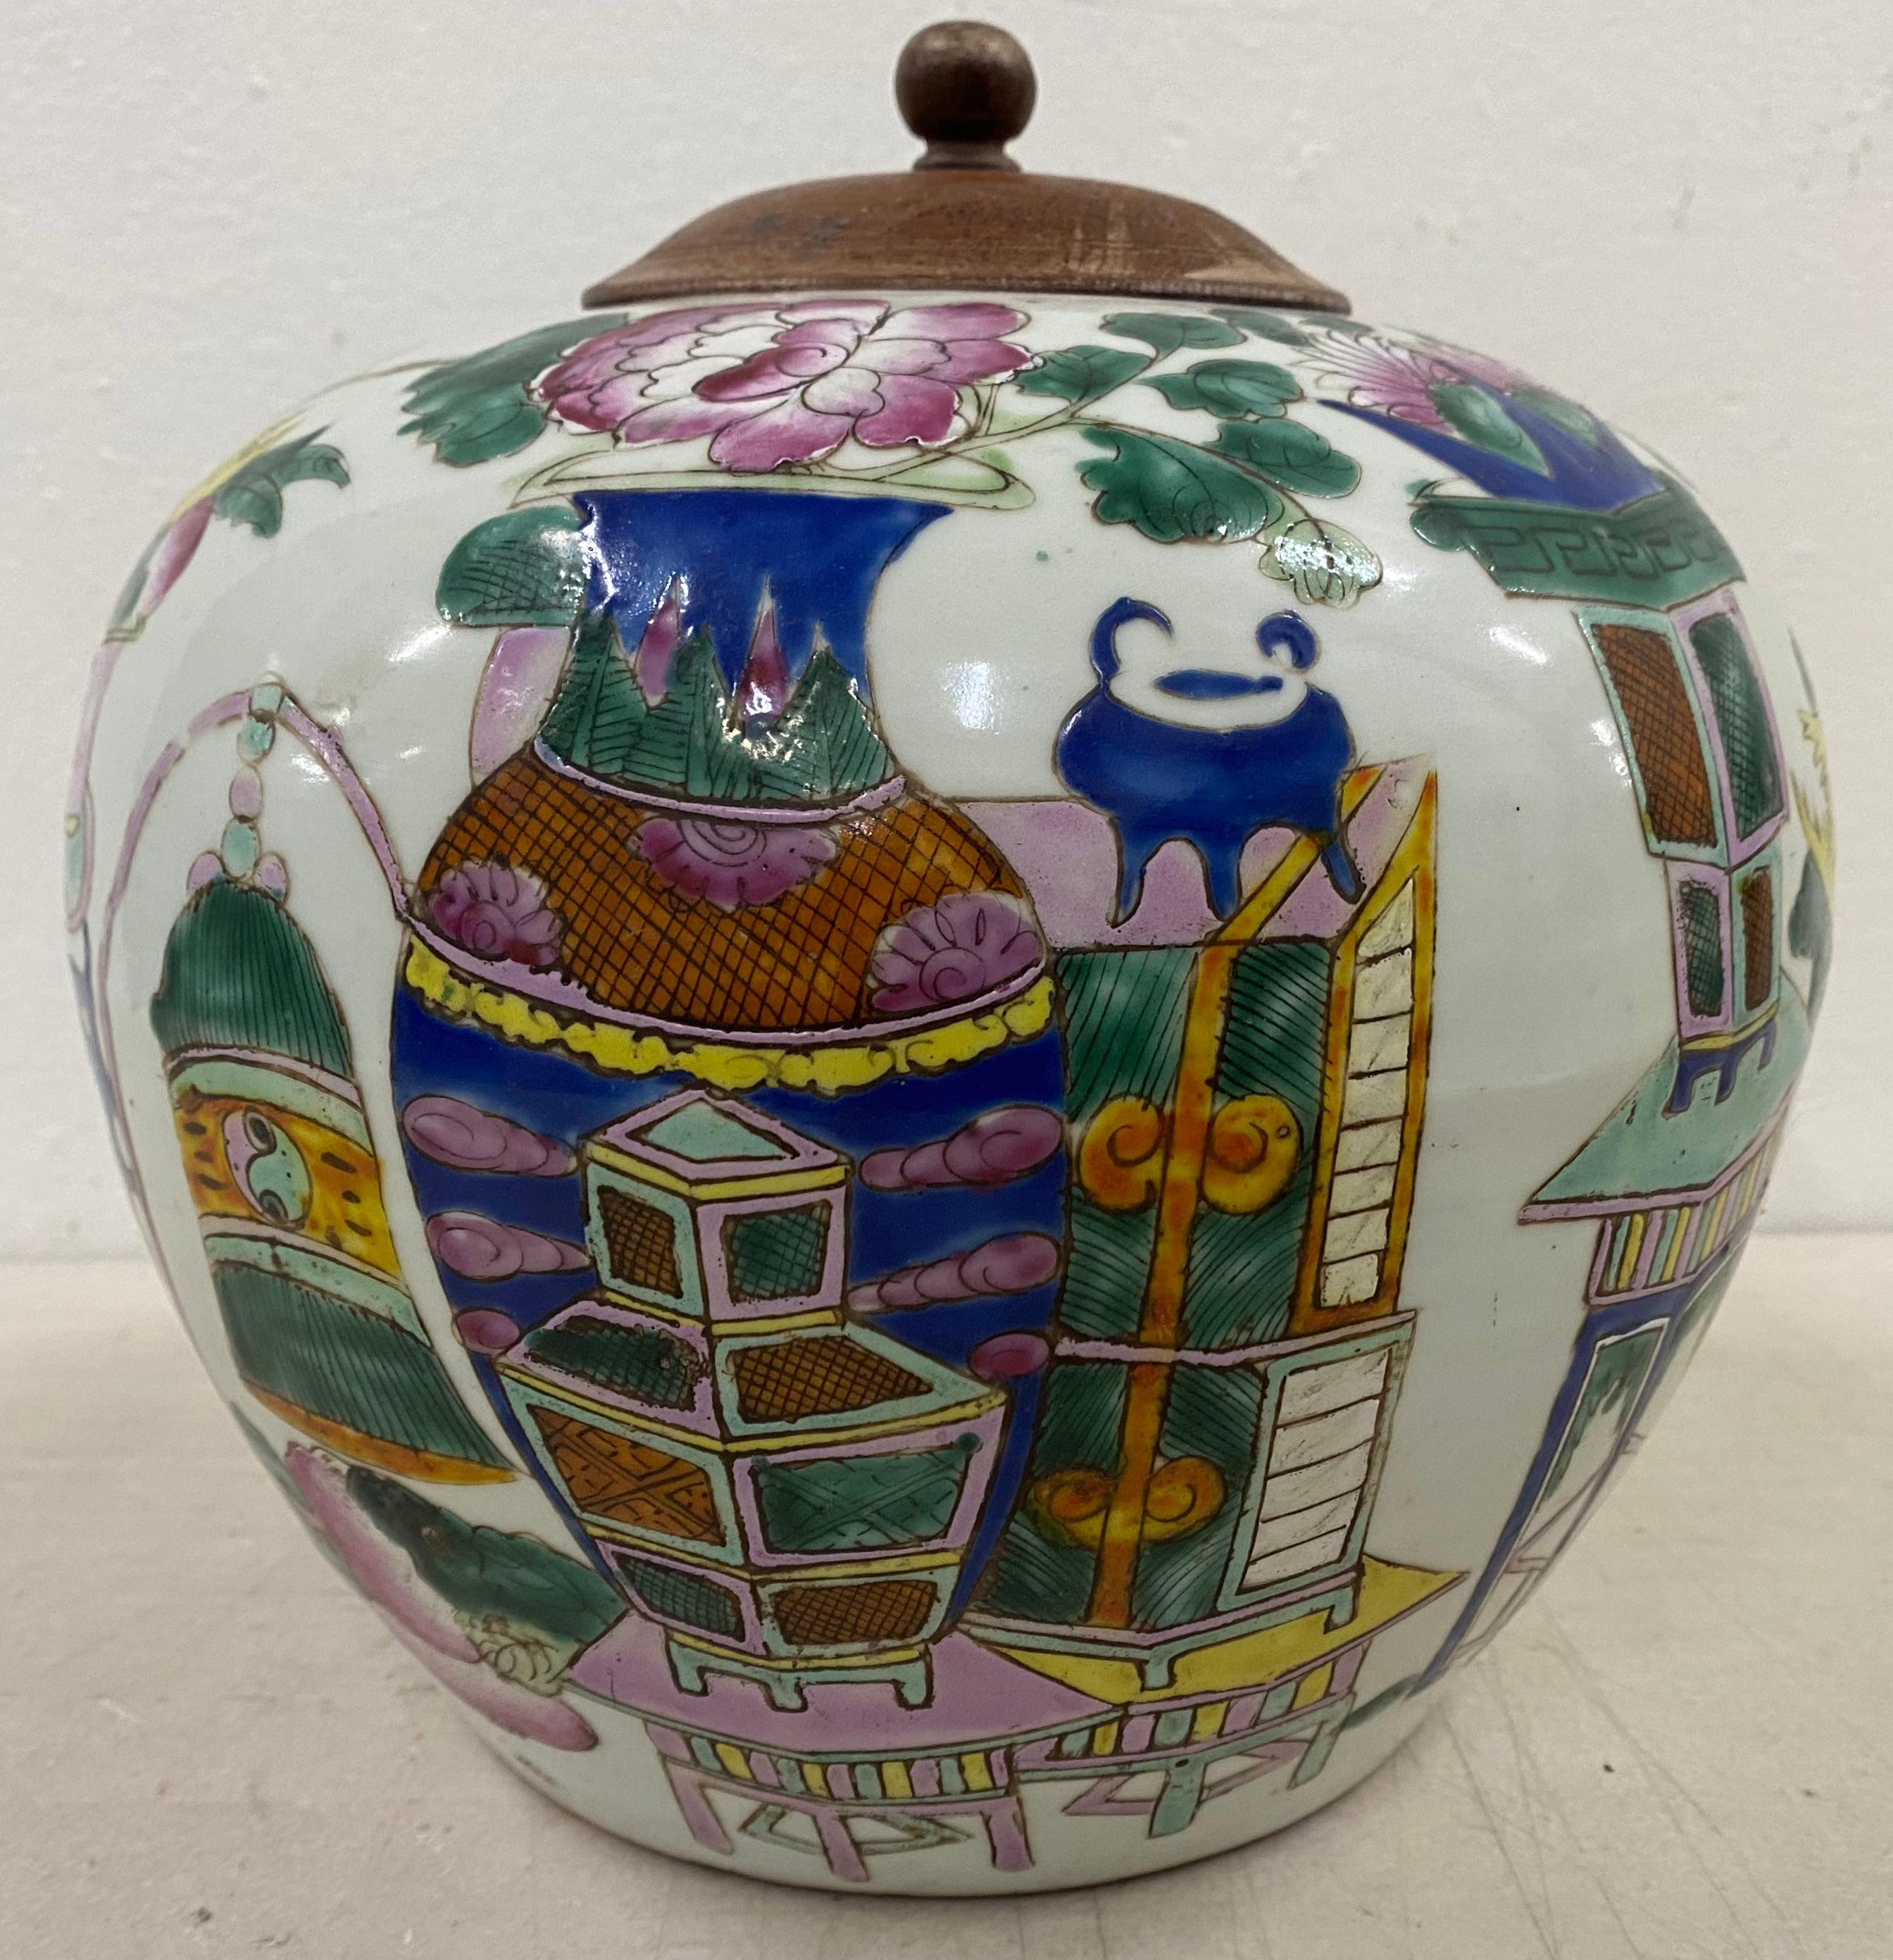 19th century hand incised and painted ginger jar

Outstanding hand made ginger jar with a variety of different motifs that include geometric patterns, peaches, Chrysanthemum's, moths, lotus, etc.

The jar has a later rosewood lid and sits atop a